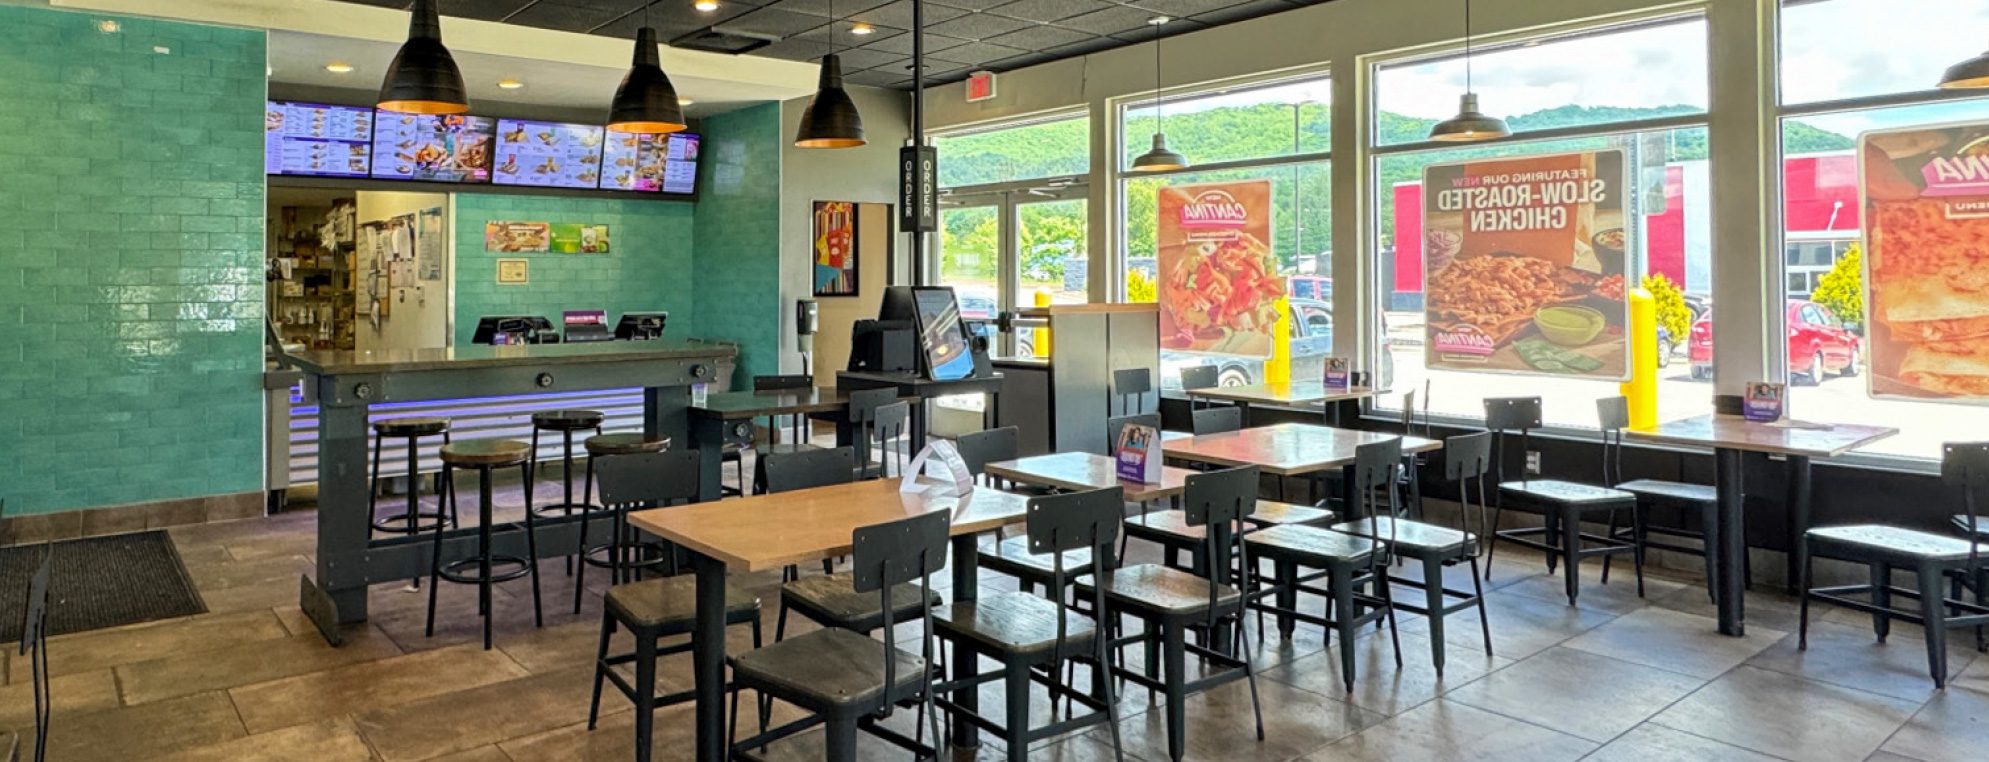 Interior of Taco Bell with Tables and chairs